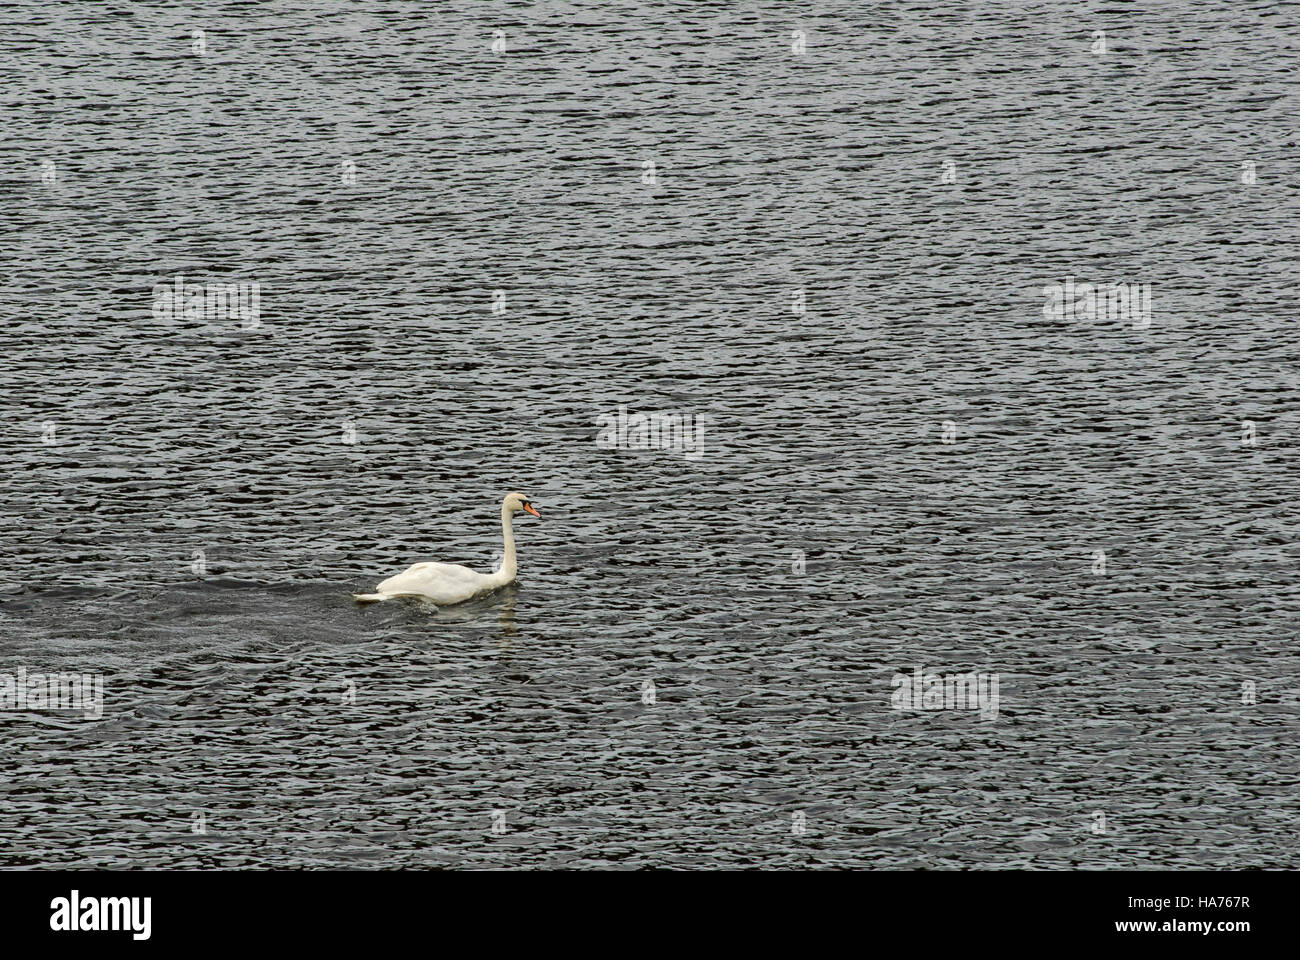 Mute swan swimming on the River Tweed, Northumberland, England, with ripples on the water Stock Photo